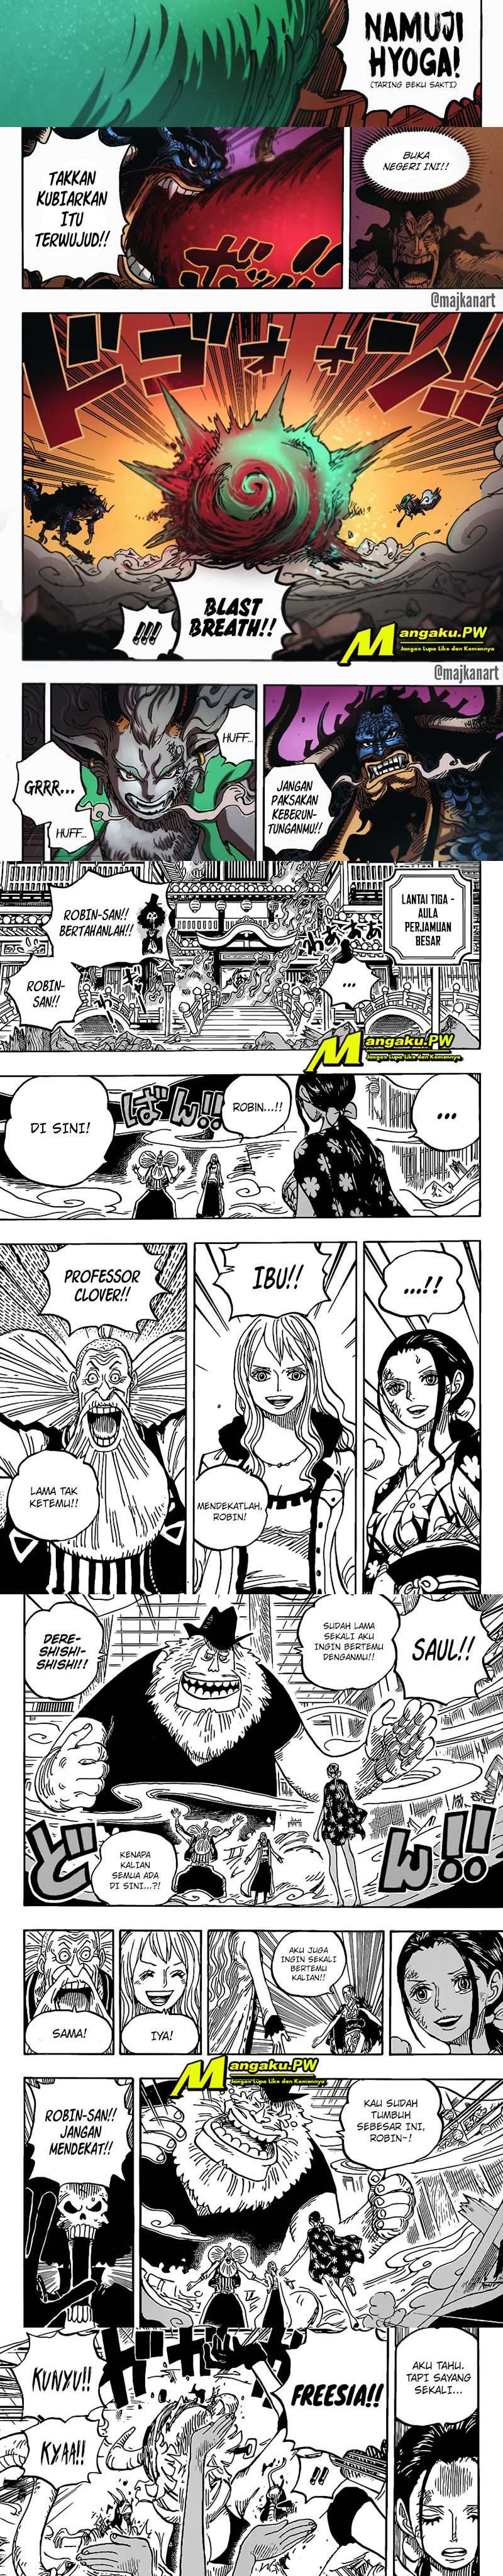 One Piece Chapter 1020